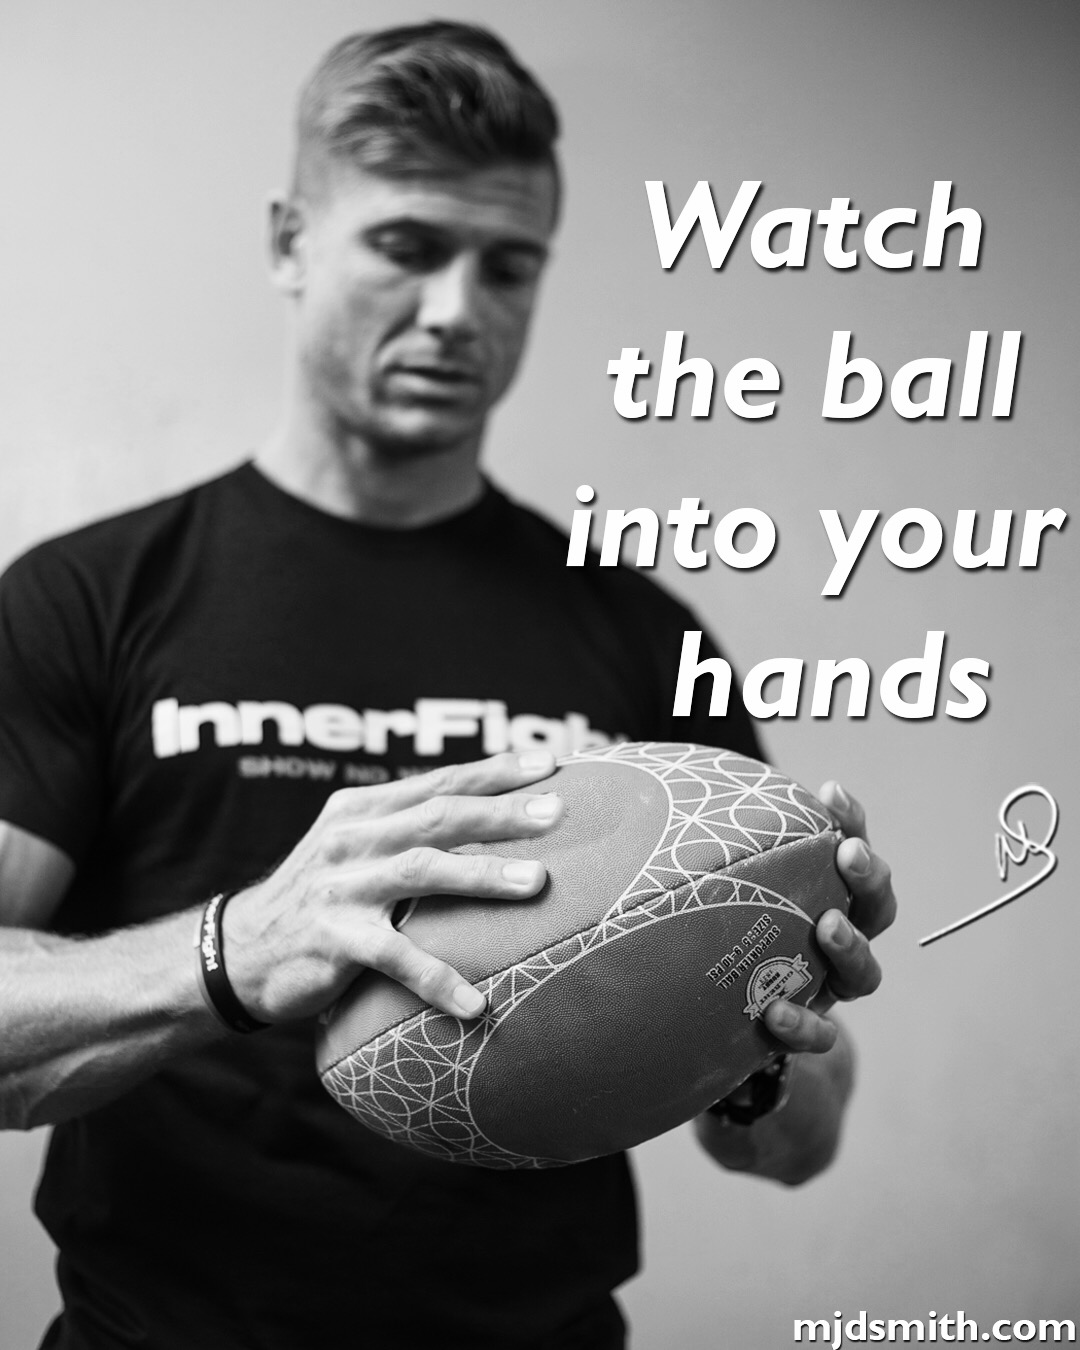 Watch the ball into your hands